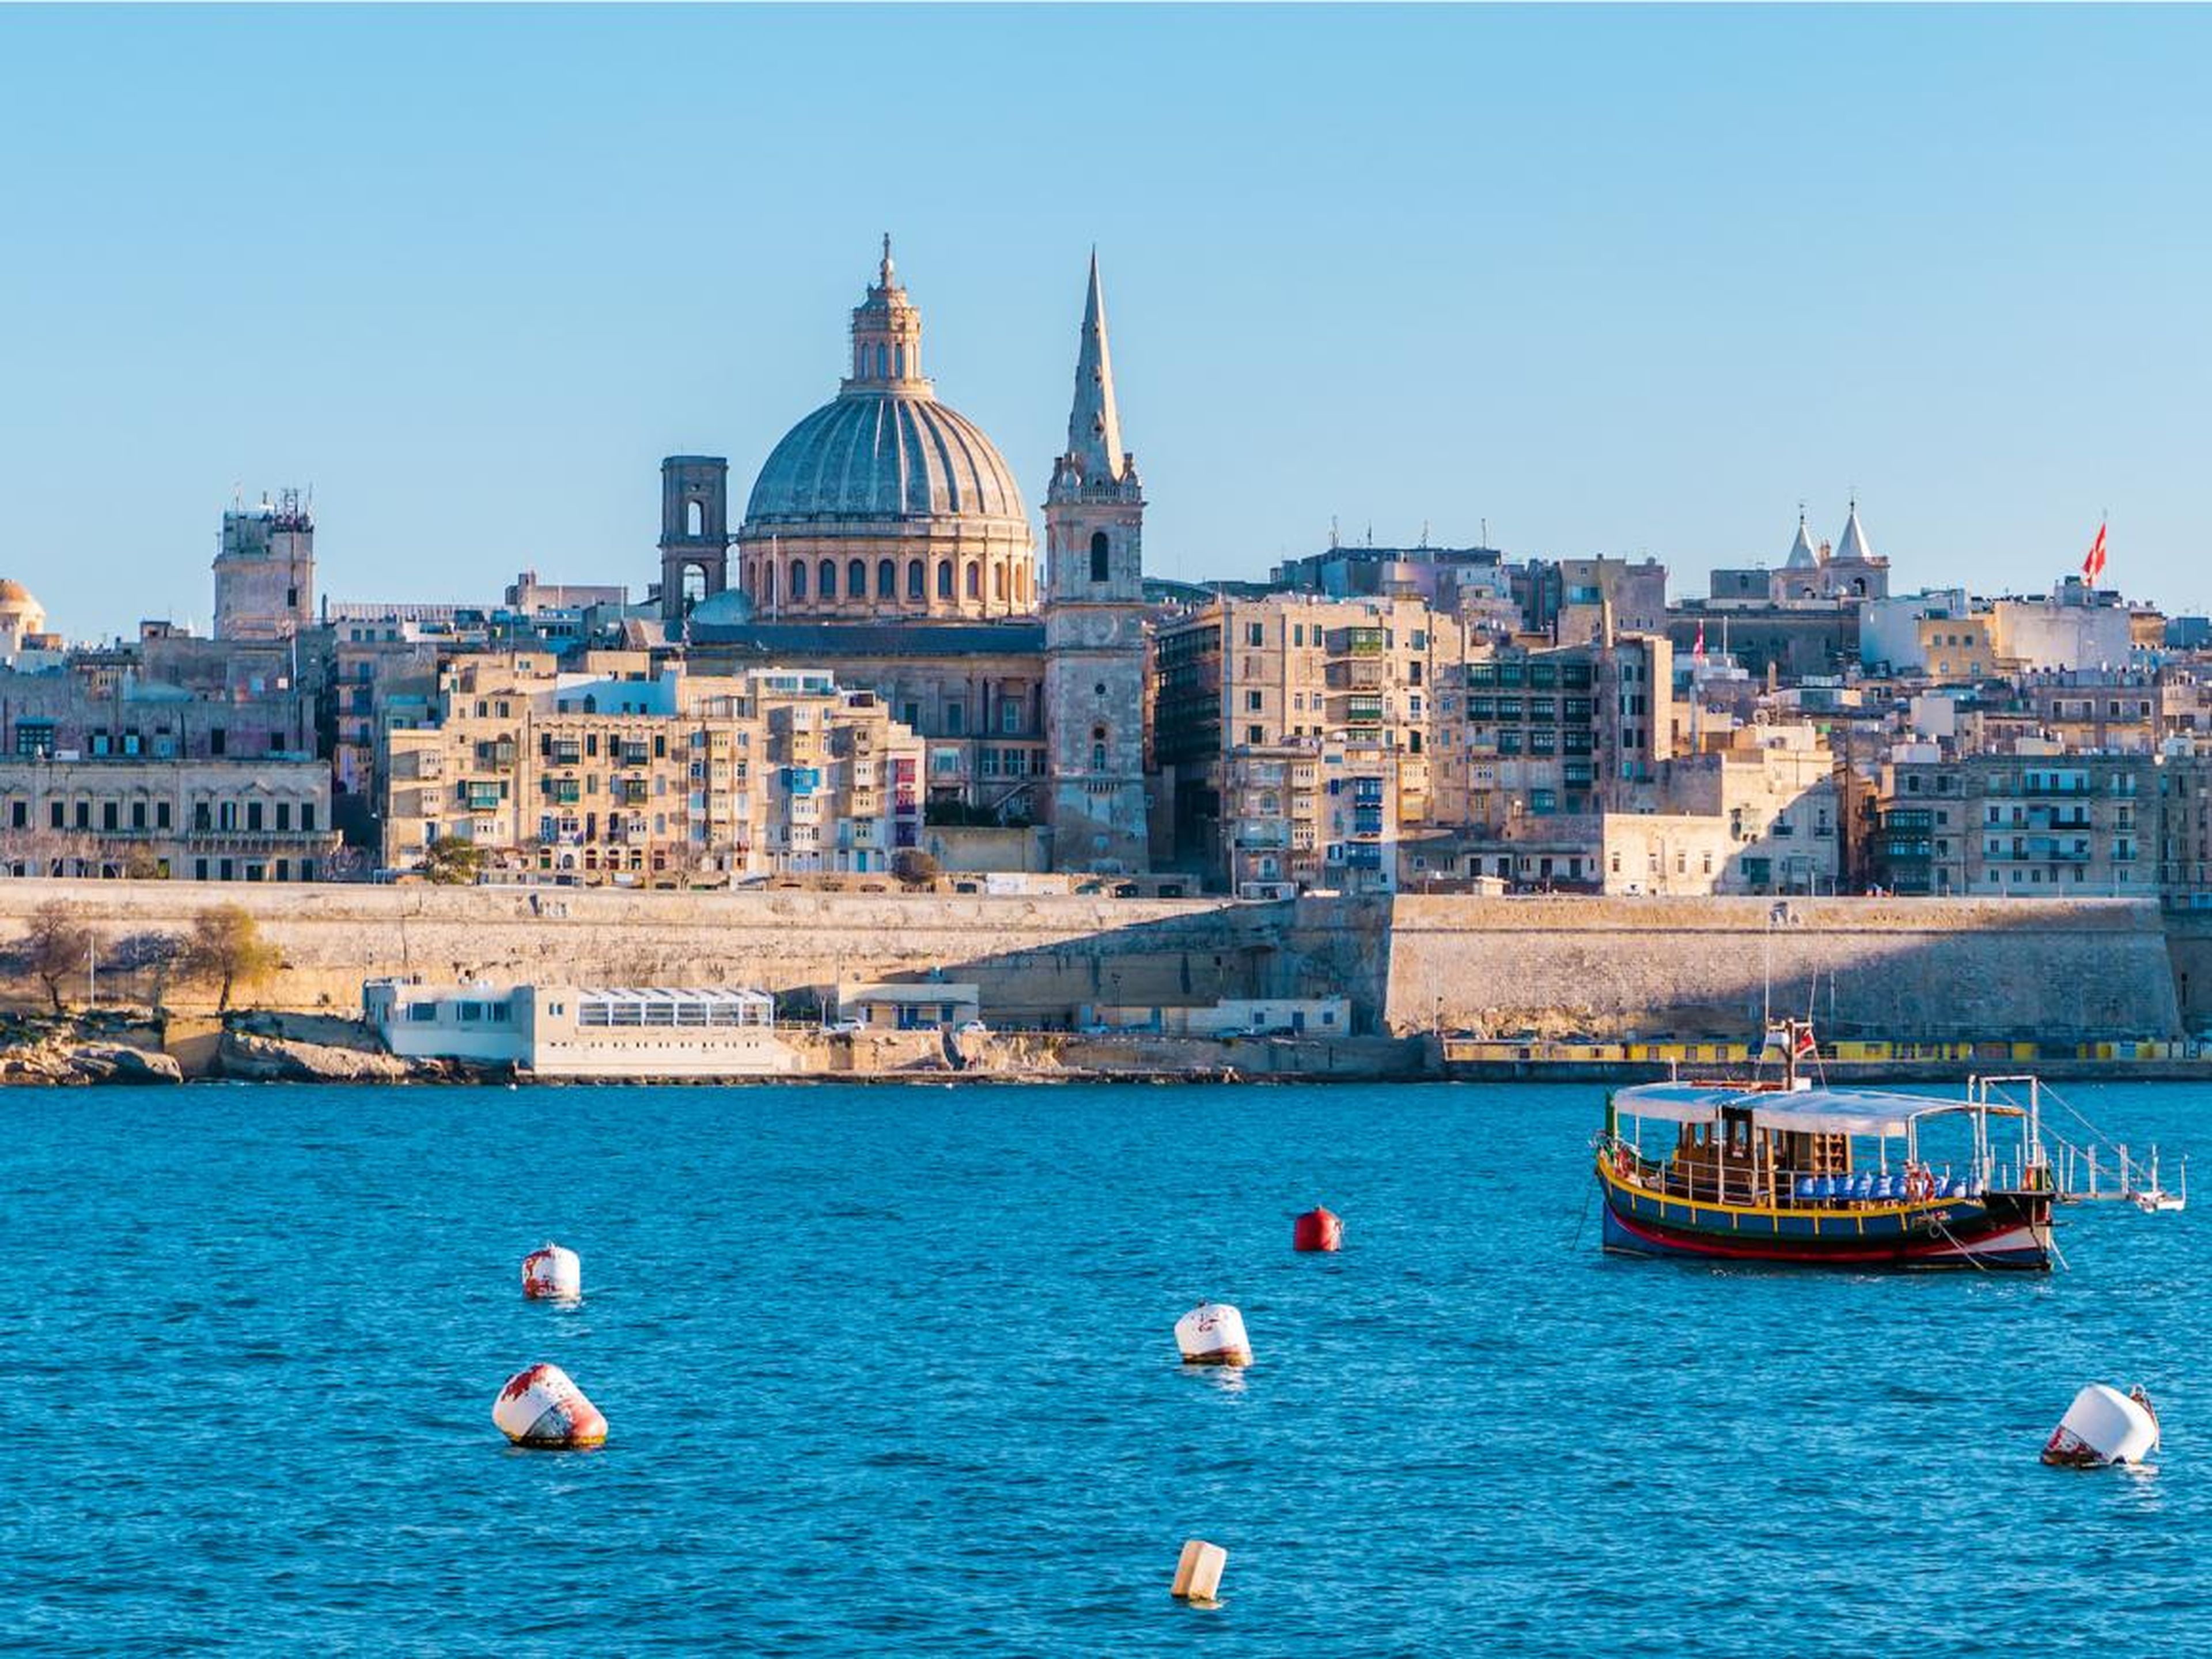 16. Malta has a long history of quality healthcare. The country, which has moved up in the health ranking since last year (when it came in 23rd), has a healthy life expectancy of 70.9 years.